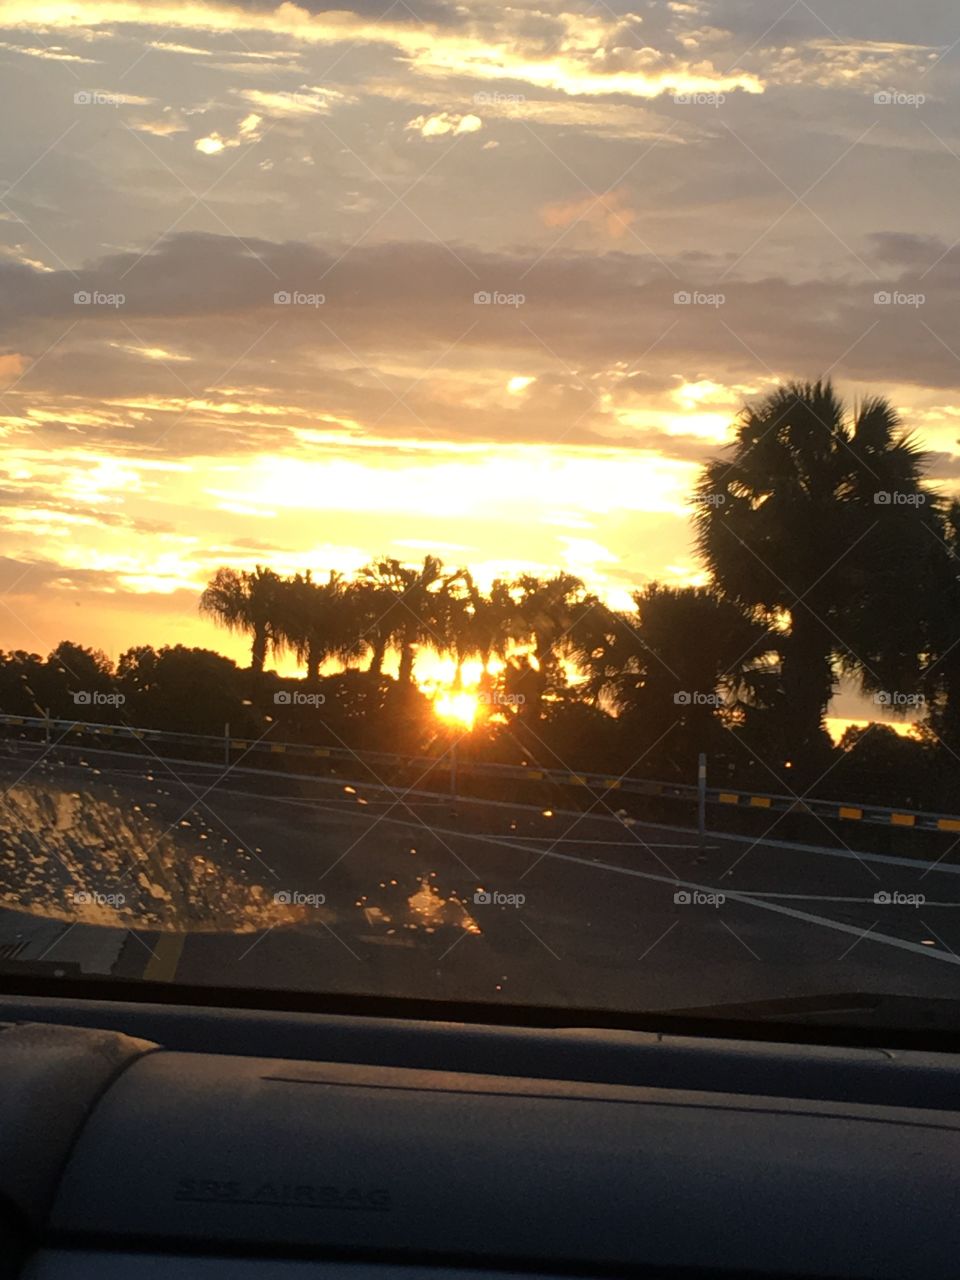 Driving at sunset had its benefits. Good thing I wasn’t driving! Pulled out my phone and got this gorgeous sunset right behind the palms!